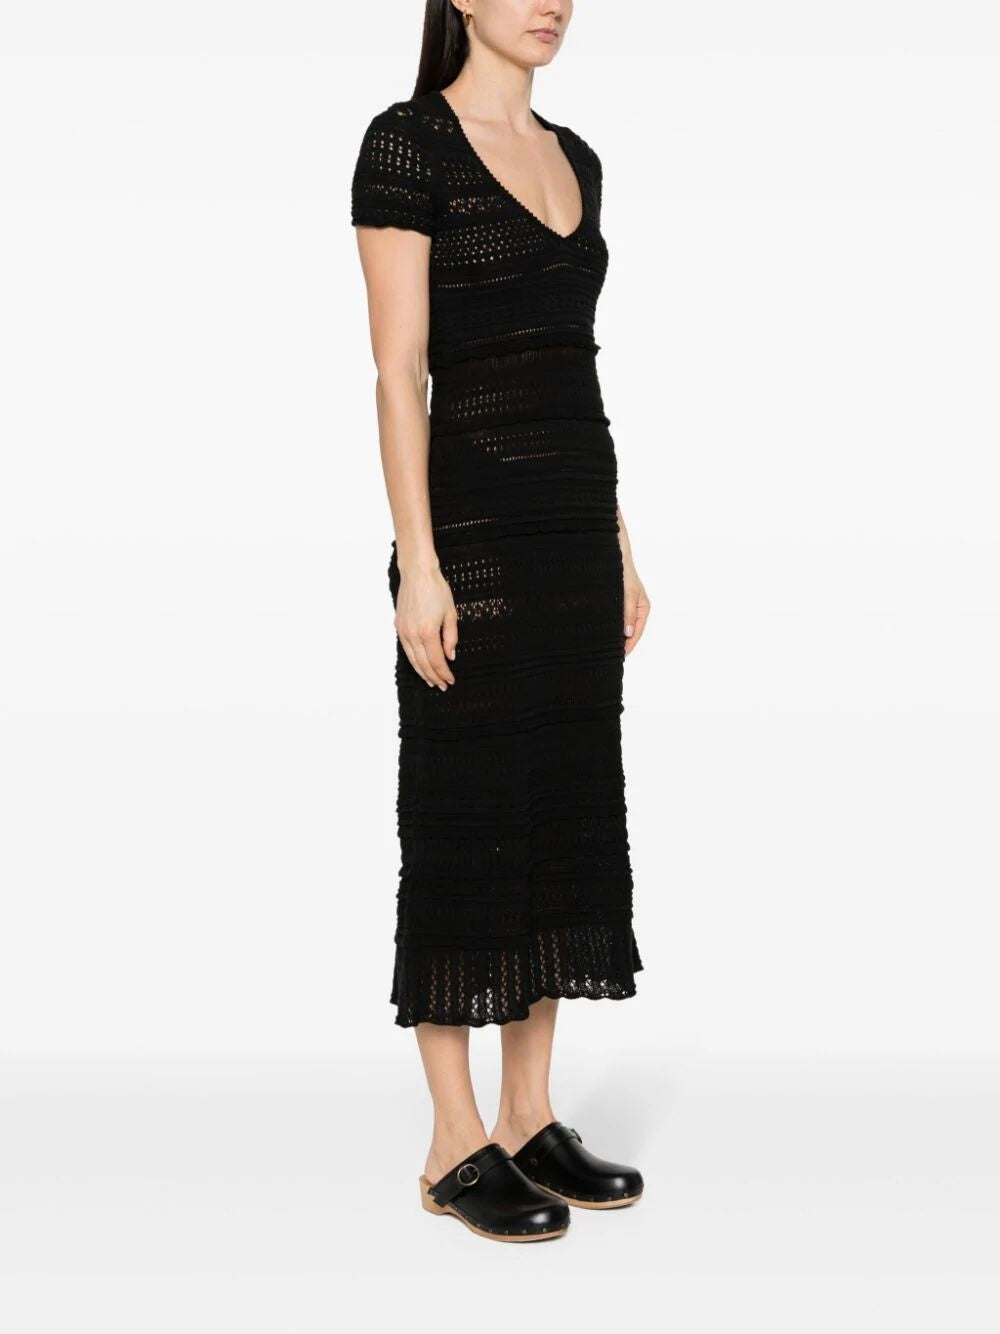 ISABEL MARANT ETOILE Black Cotton Maxi Dress for Women - SS24 Collection